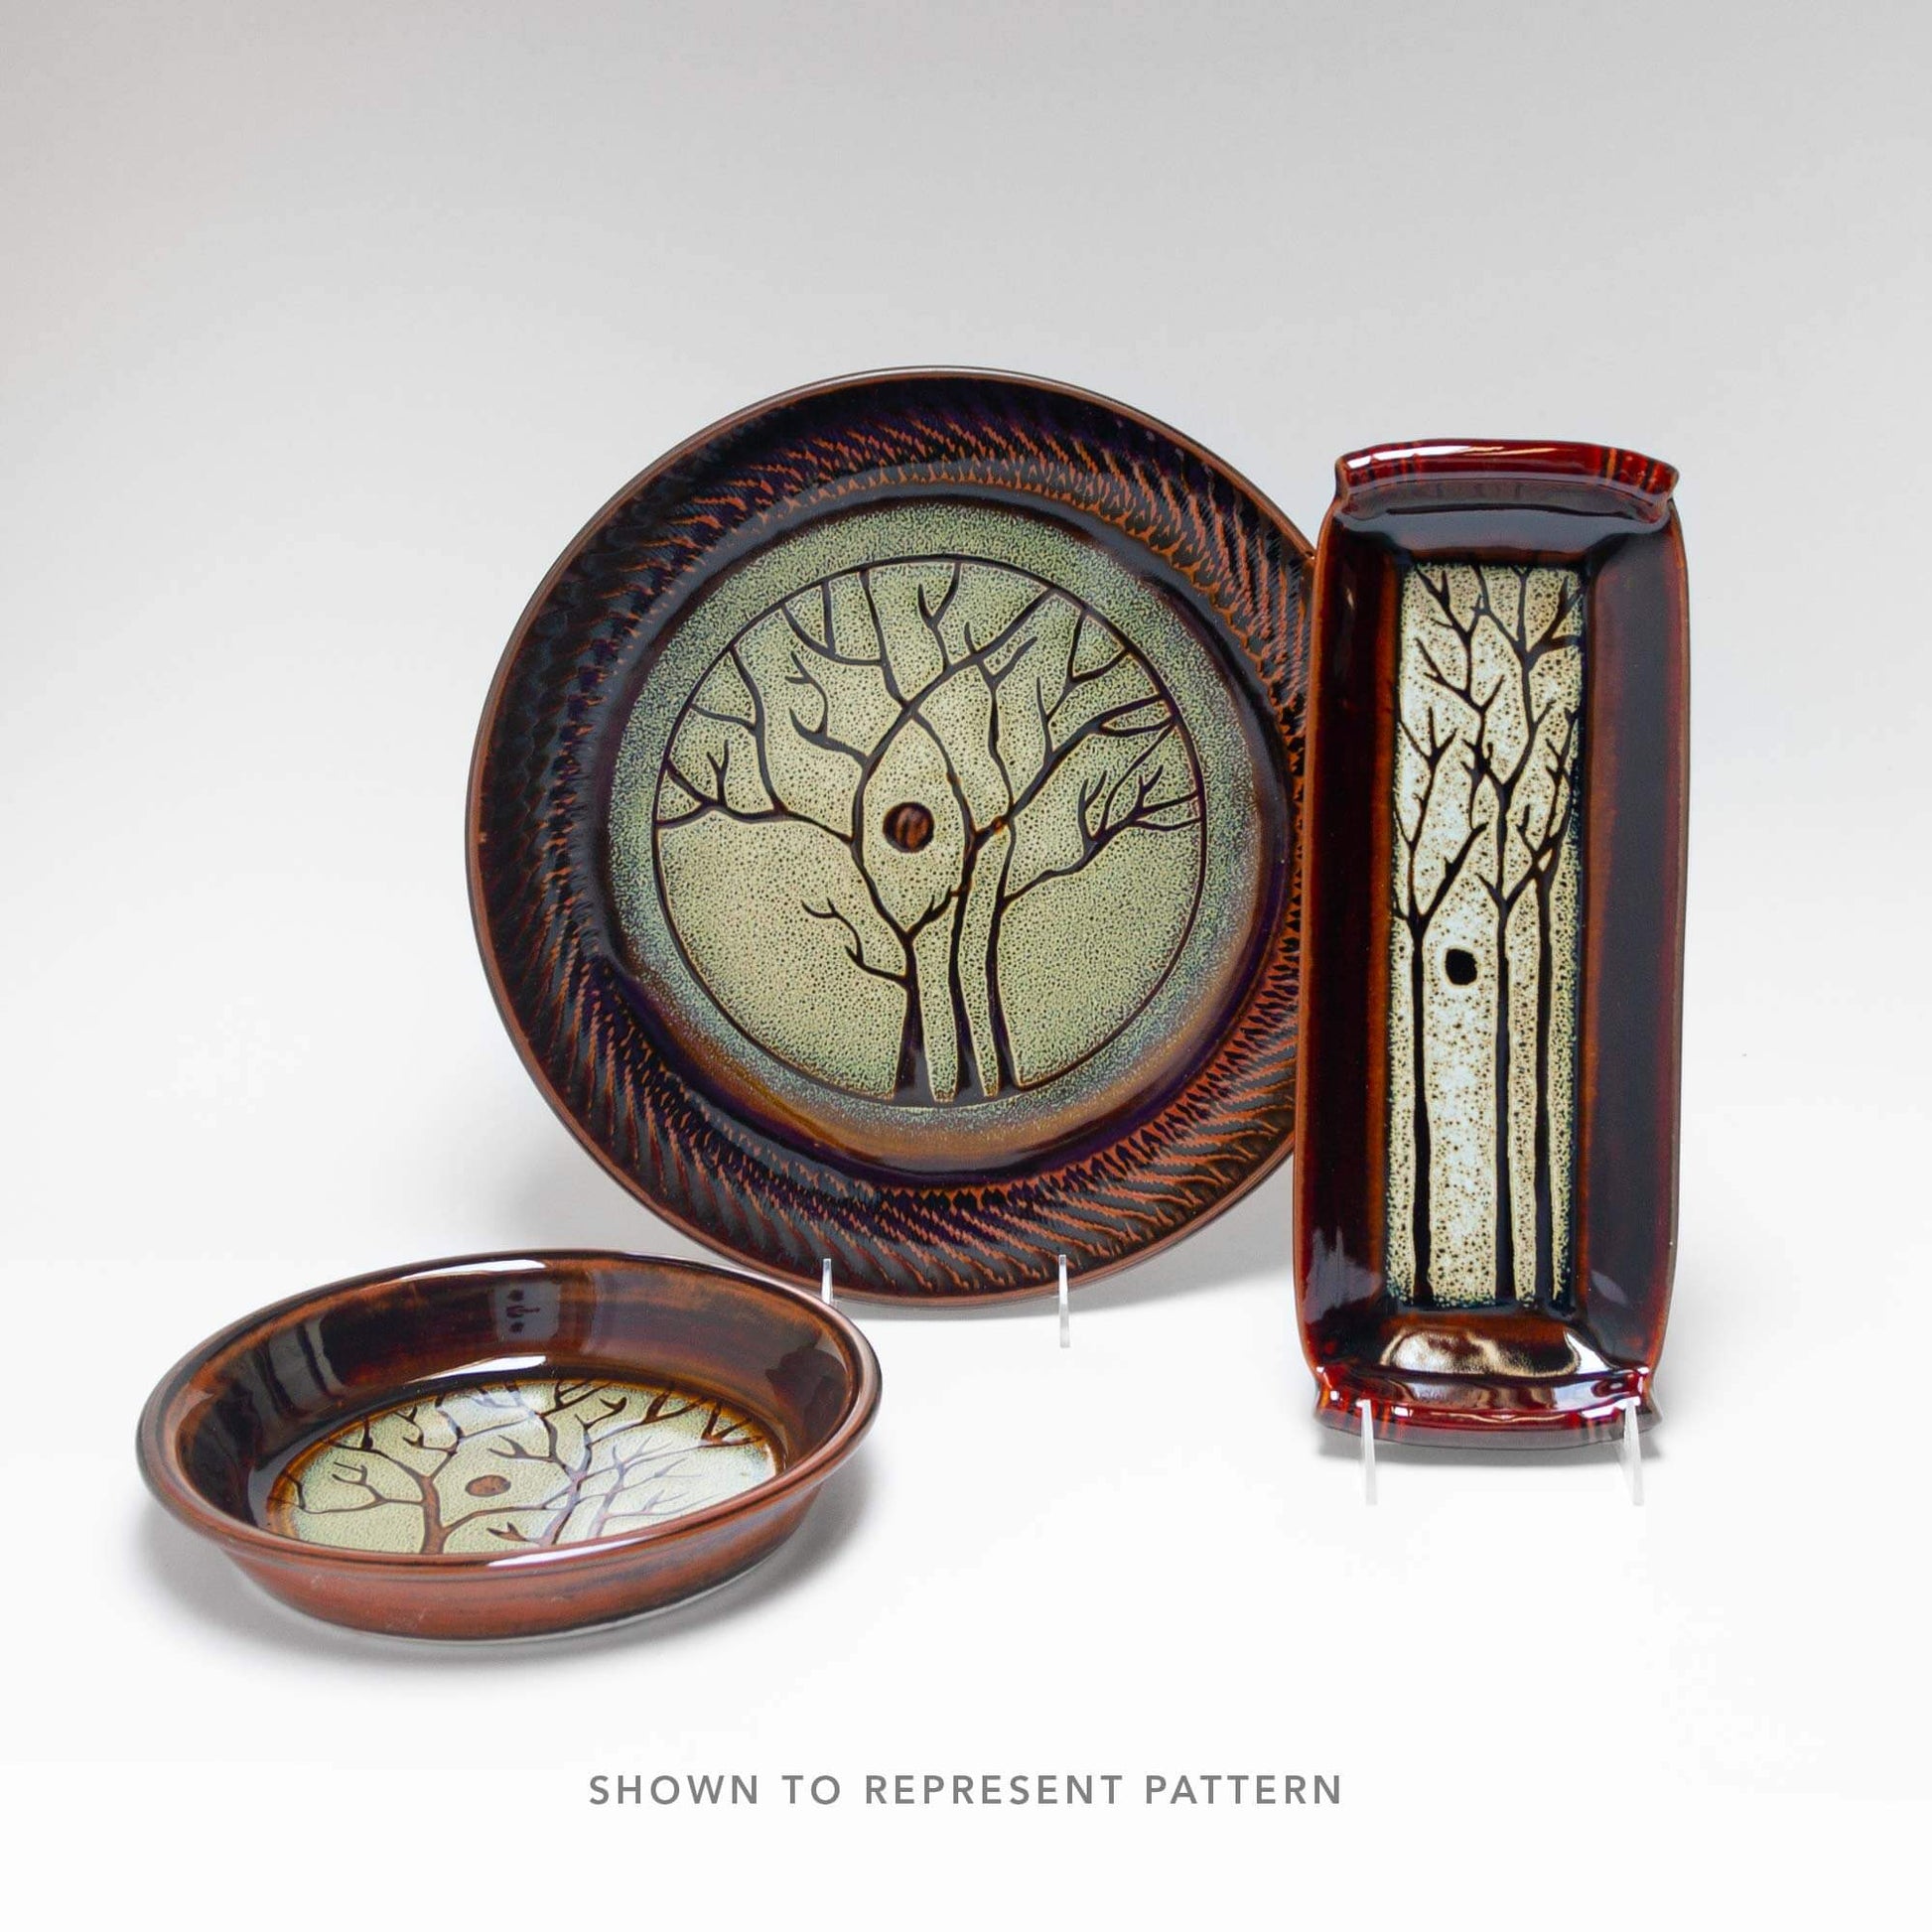 Handmade Pottery Harvest Bowl in Hamada Tree pattern made by Georgetown Pottery in Maine